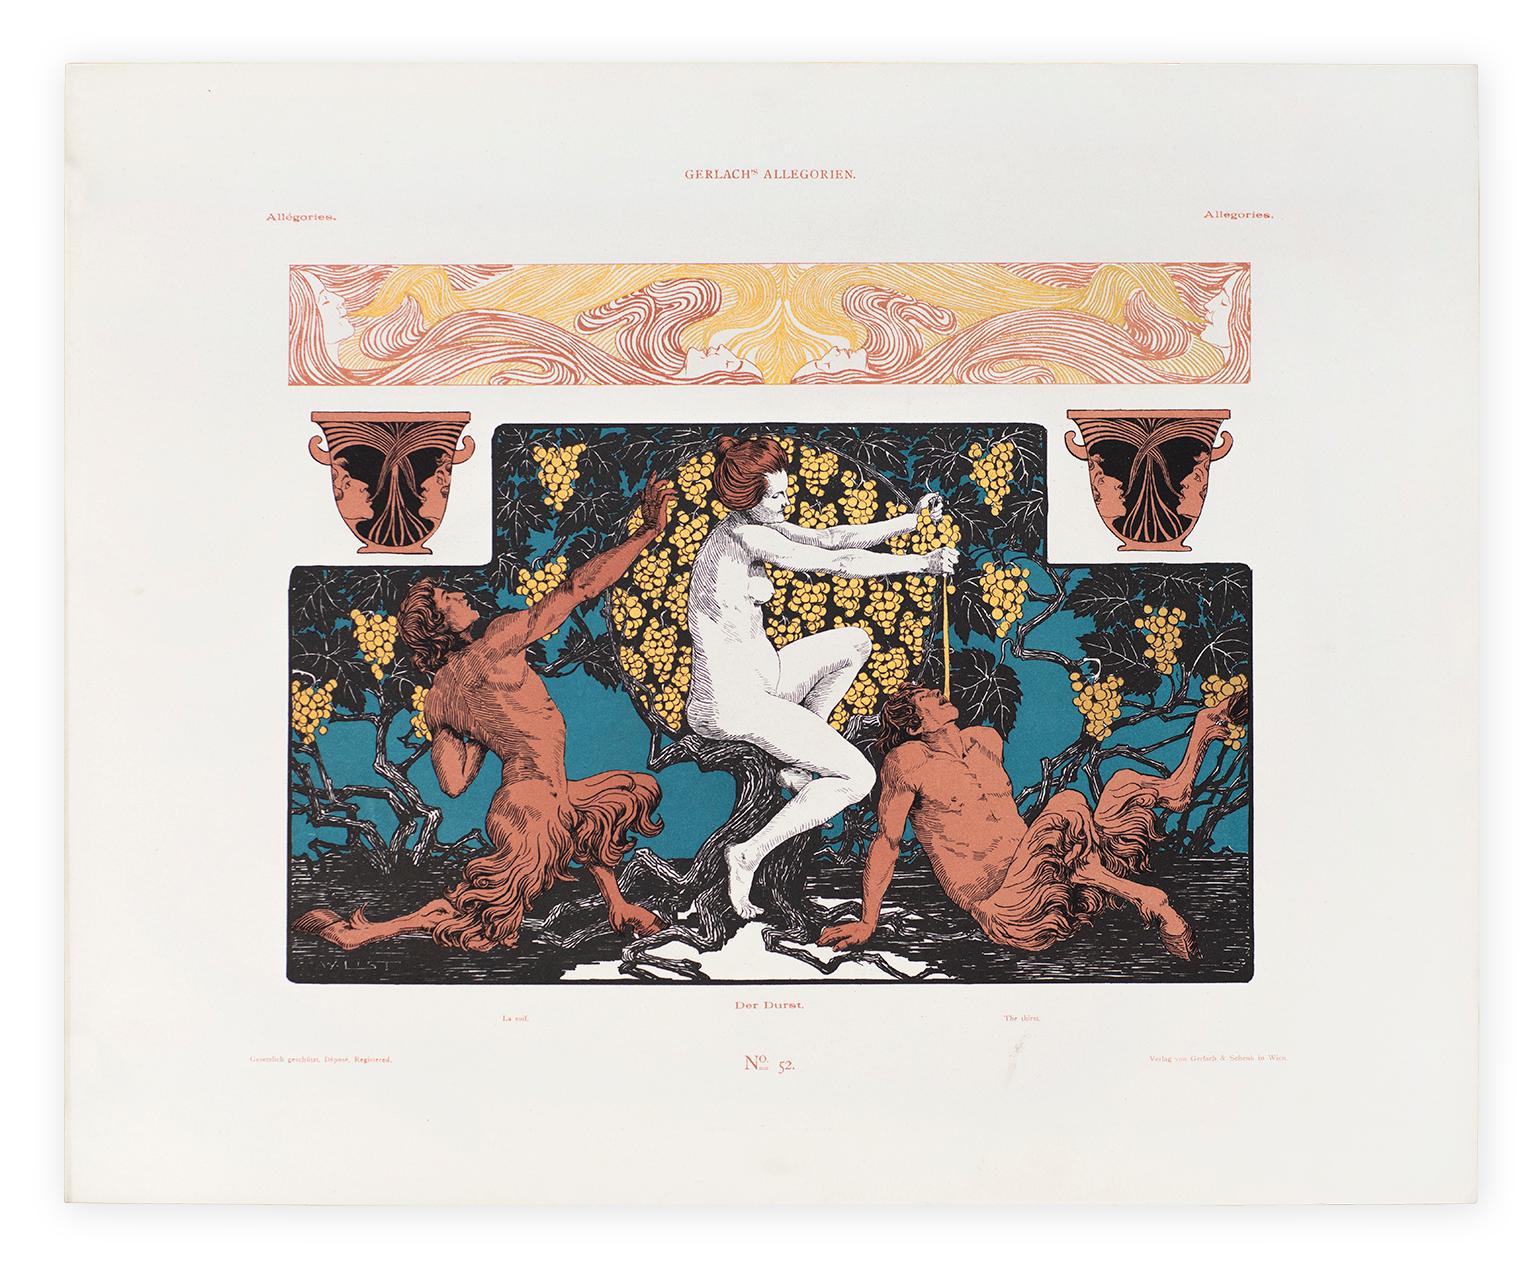 The Thirst, Plate 52 from Gerlach's Allegorien, Vienna Secession lithograph - Print by Wilhelm List